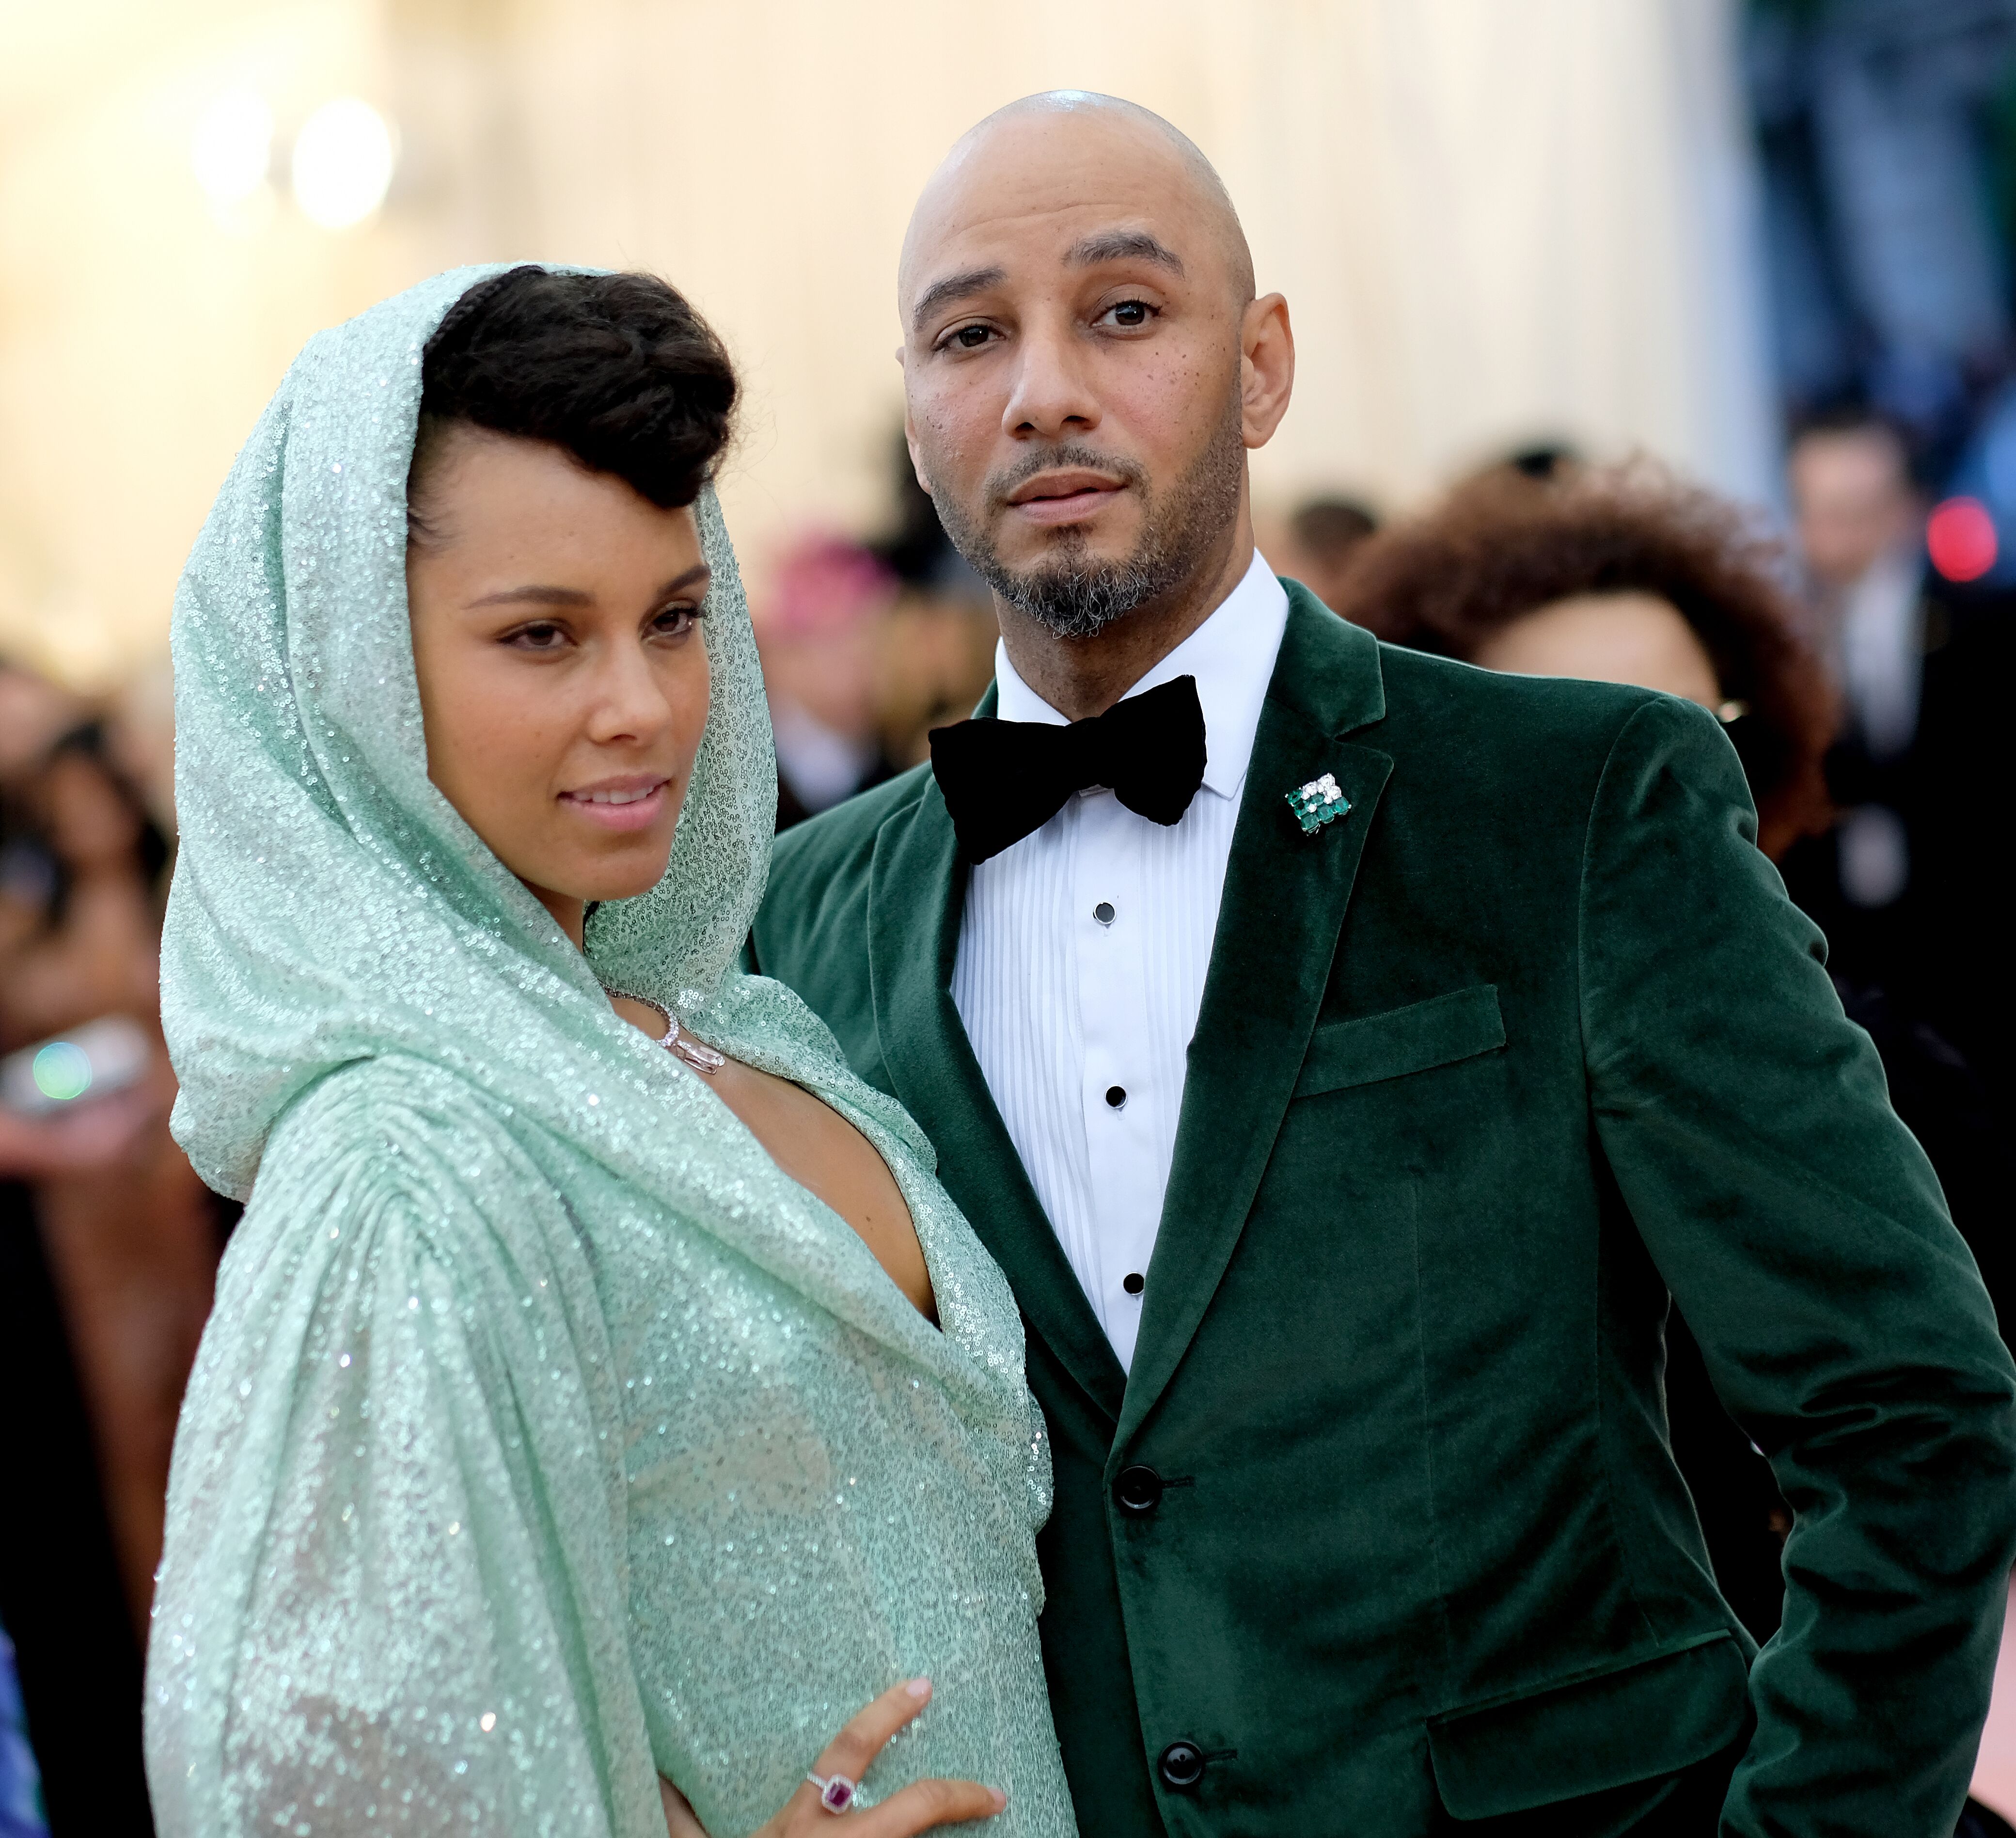 Alicia Keys and Swizz Beatz at the 2019 Met Gala at the Metropolitan Museum of Art in 2019. | Photo: Getty Images